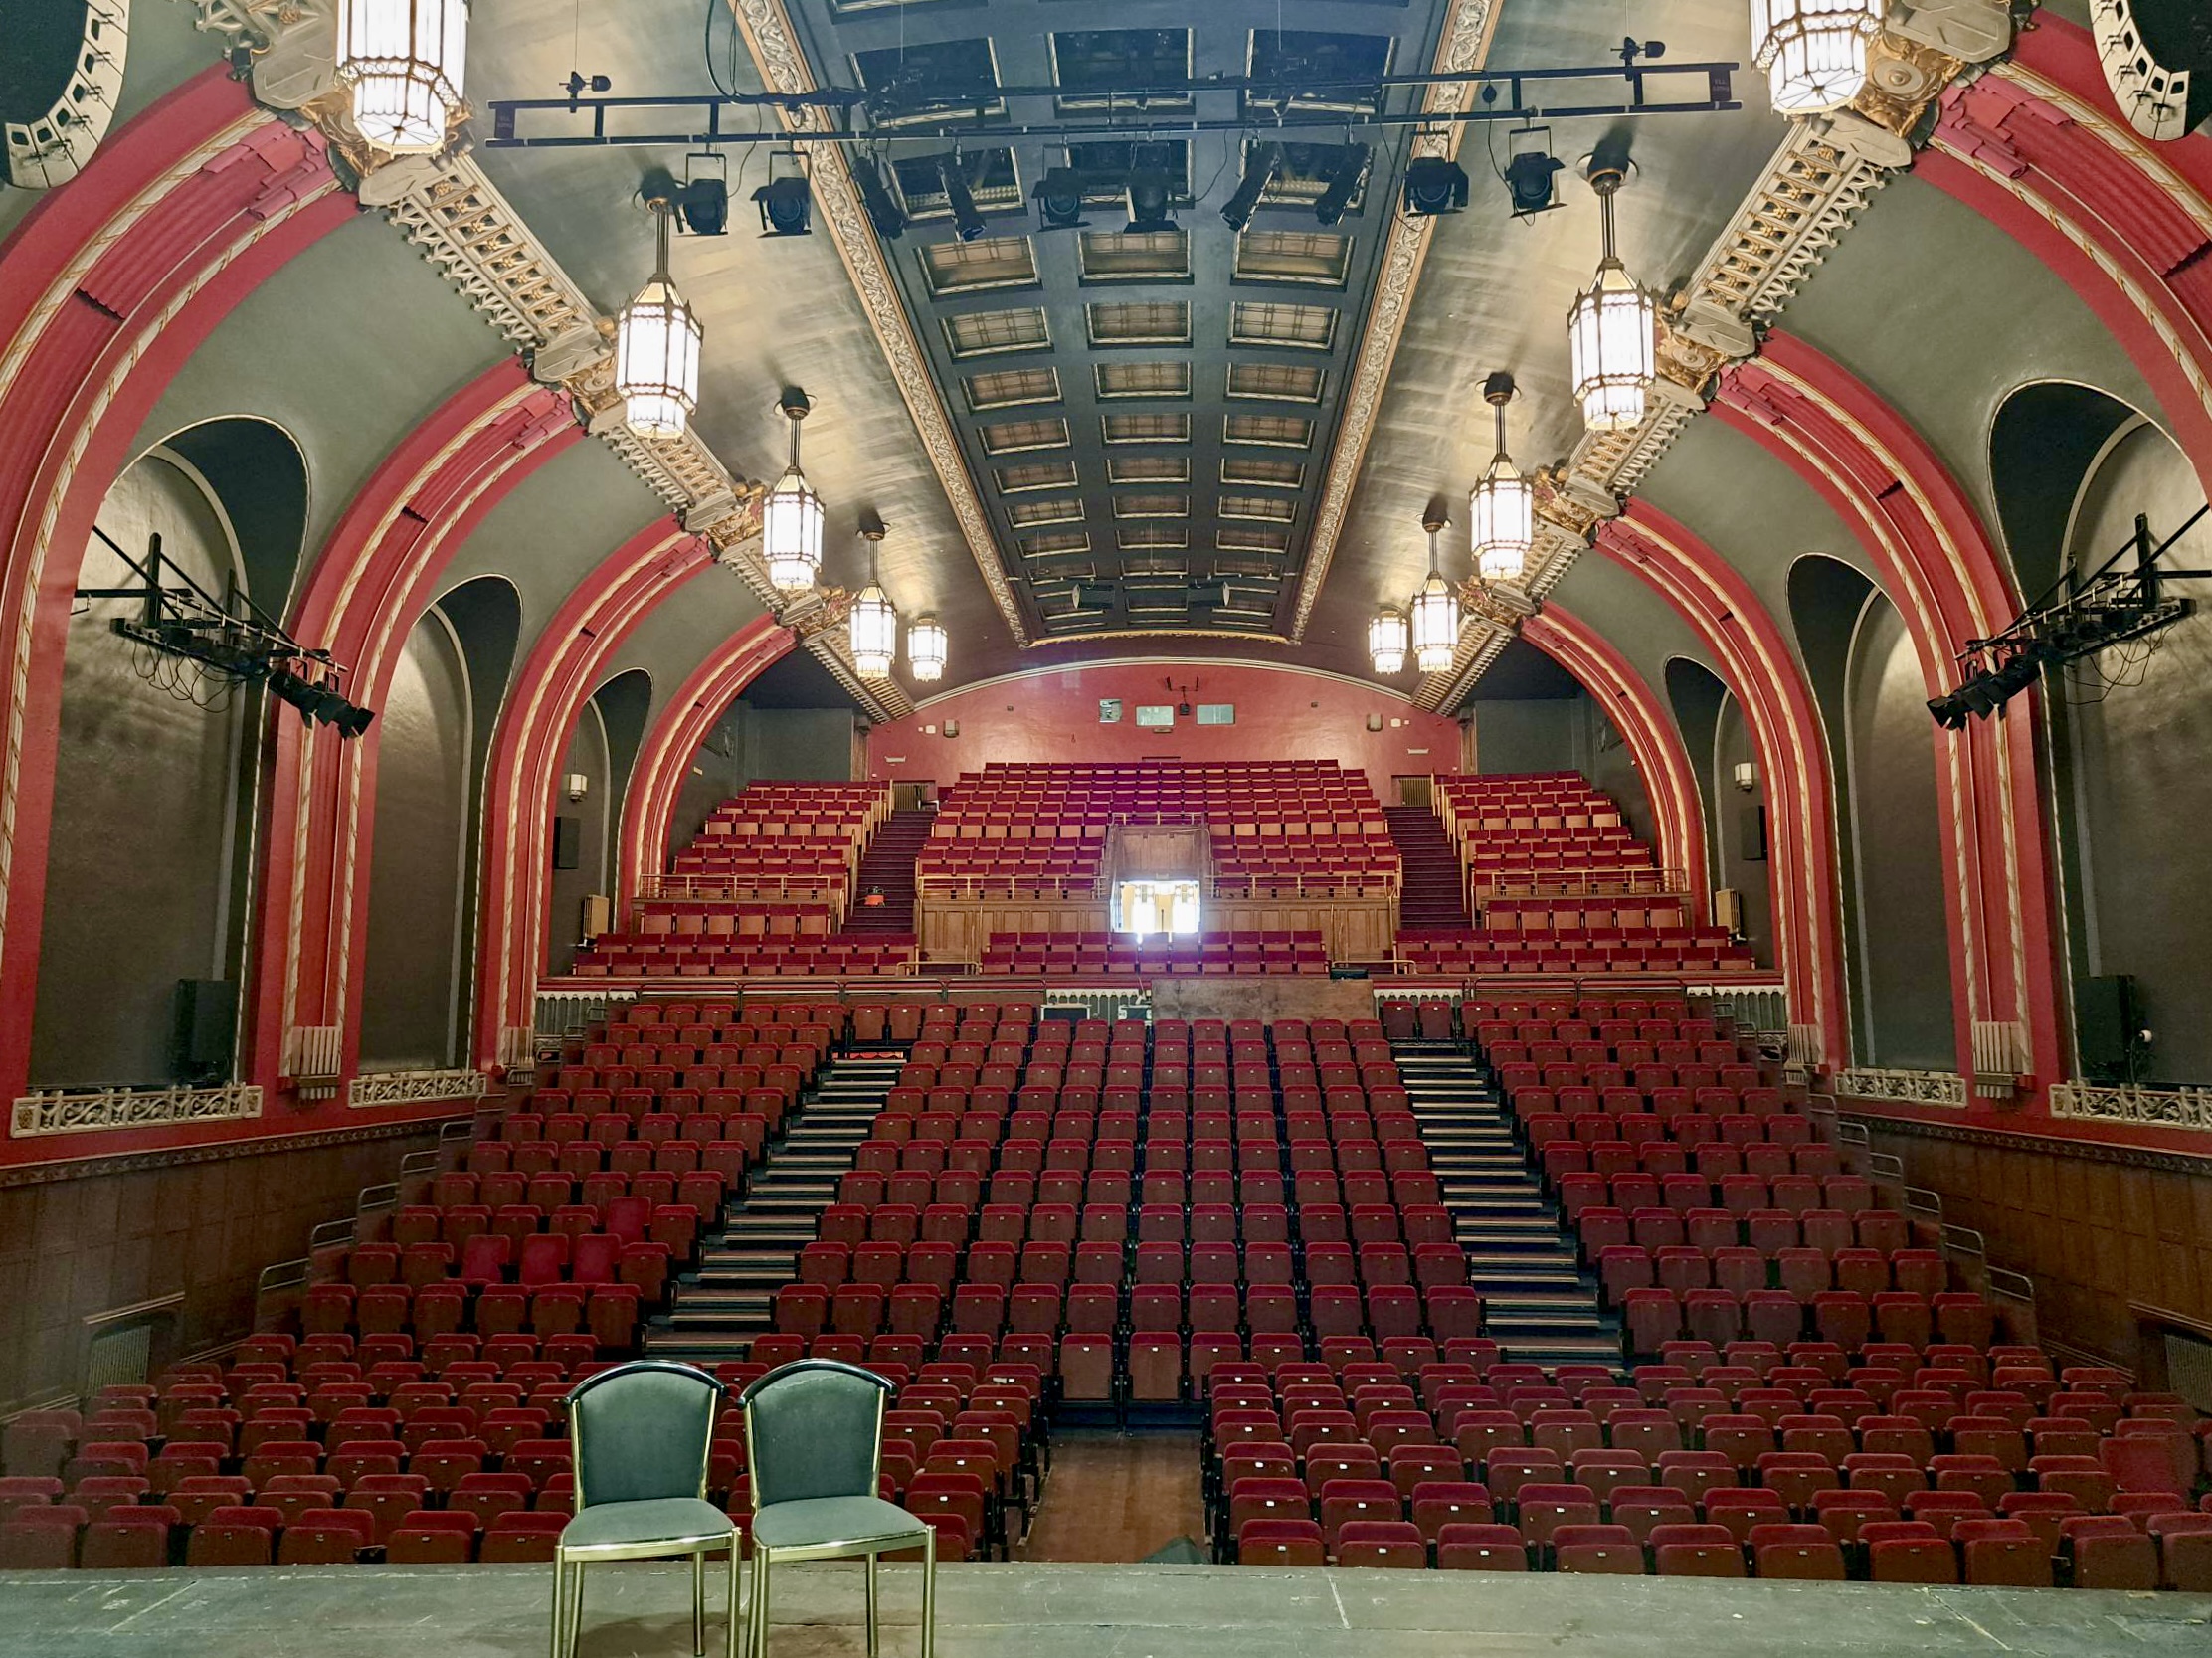 Broadway Theatre - Completion